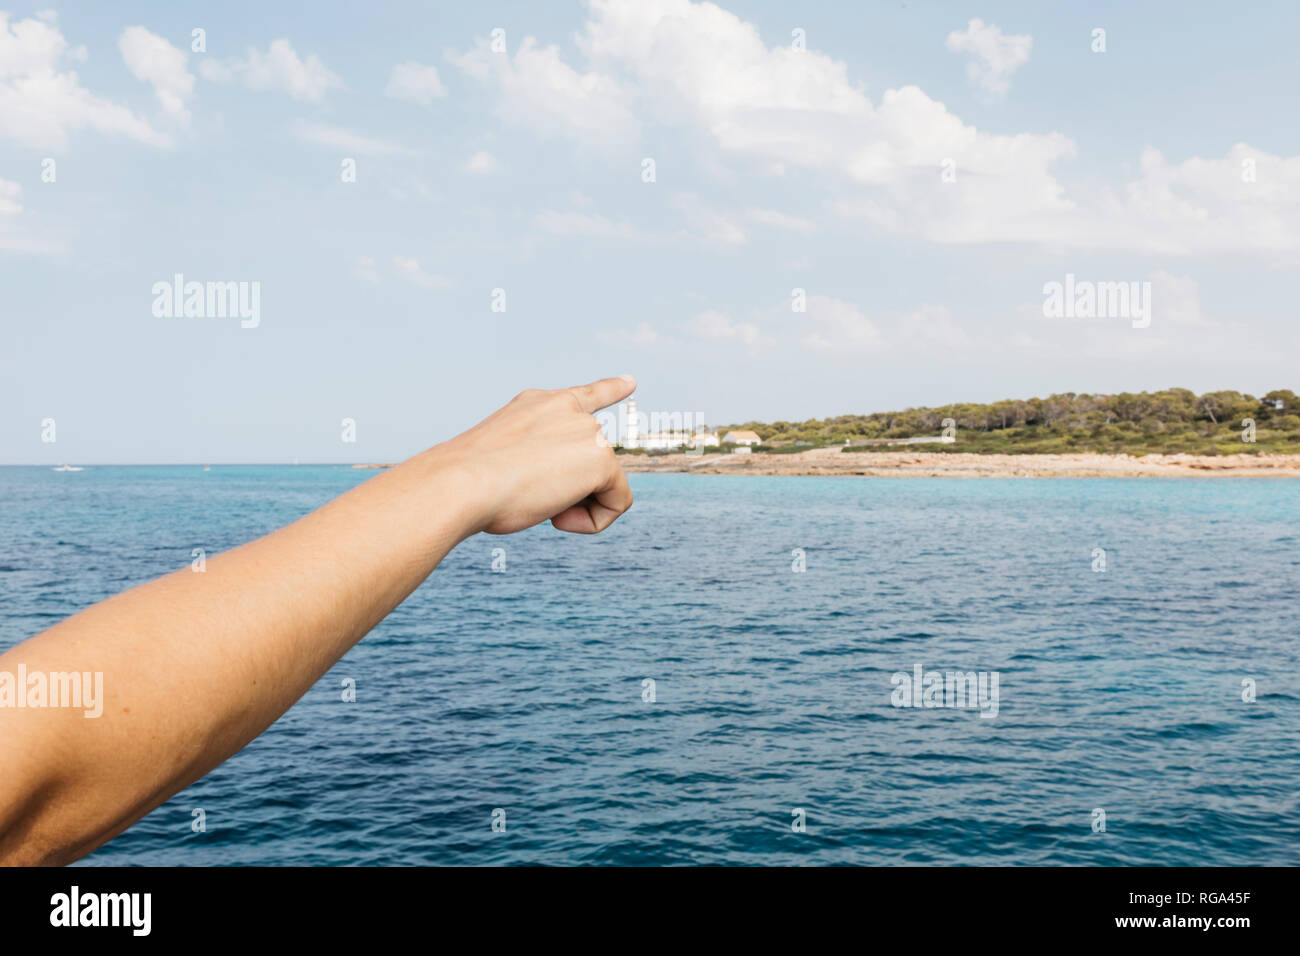 Woman's hand pointing at Cap Balnc lighthouse, Mallorca, Spin Stock Photo